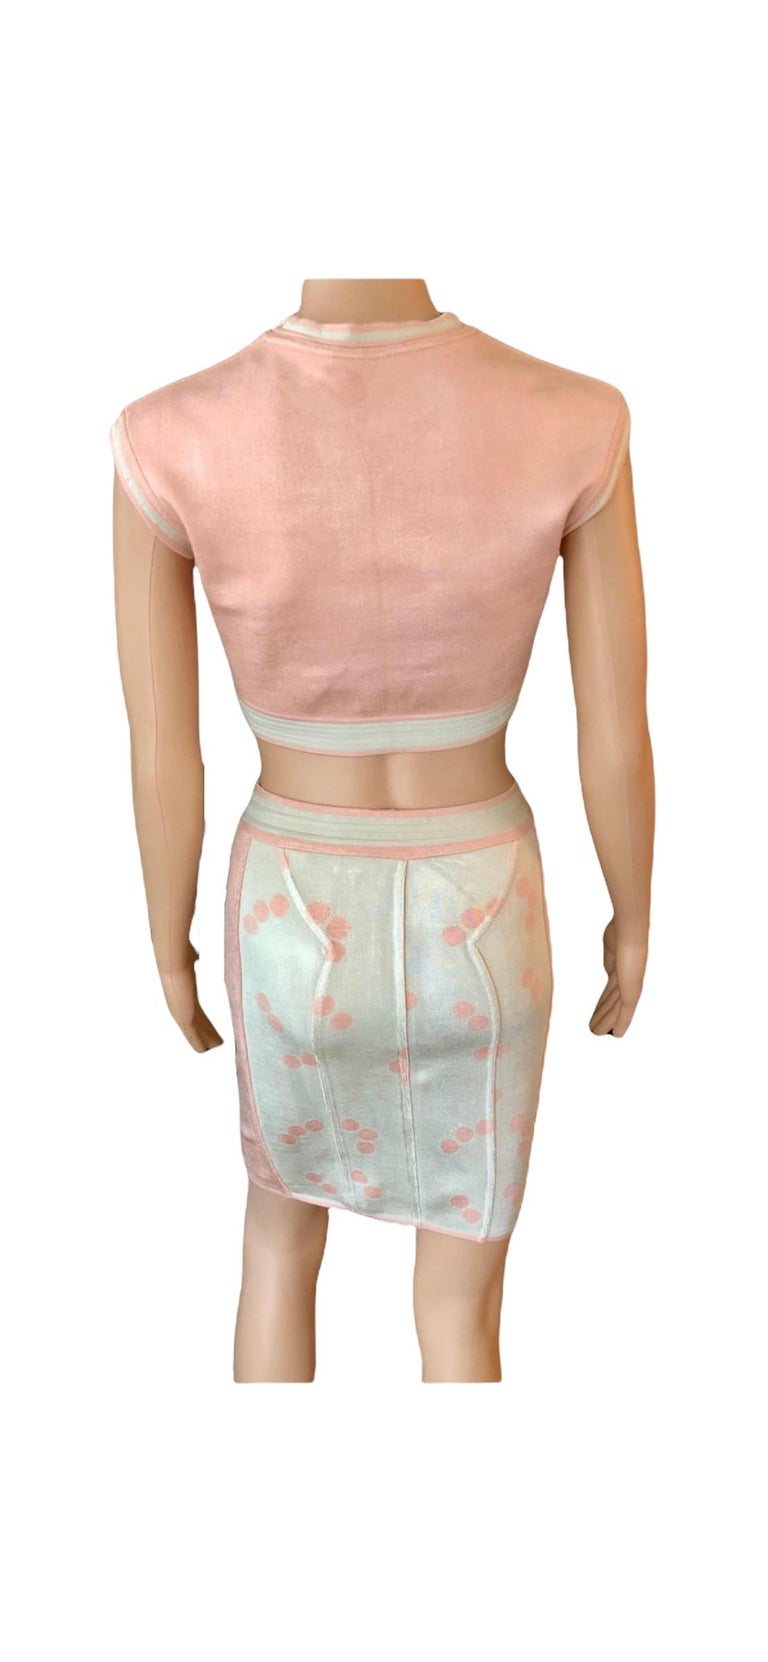 Azzedine Alaia S/S 1991 Vintage Skirt and Crop Top 2 Piece Set For Sale ...